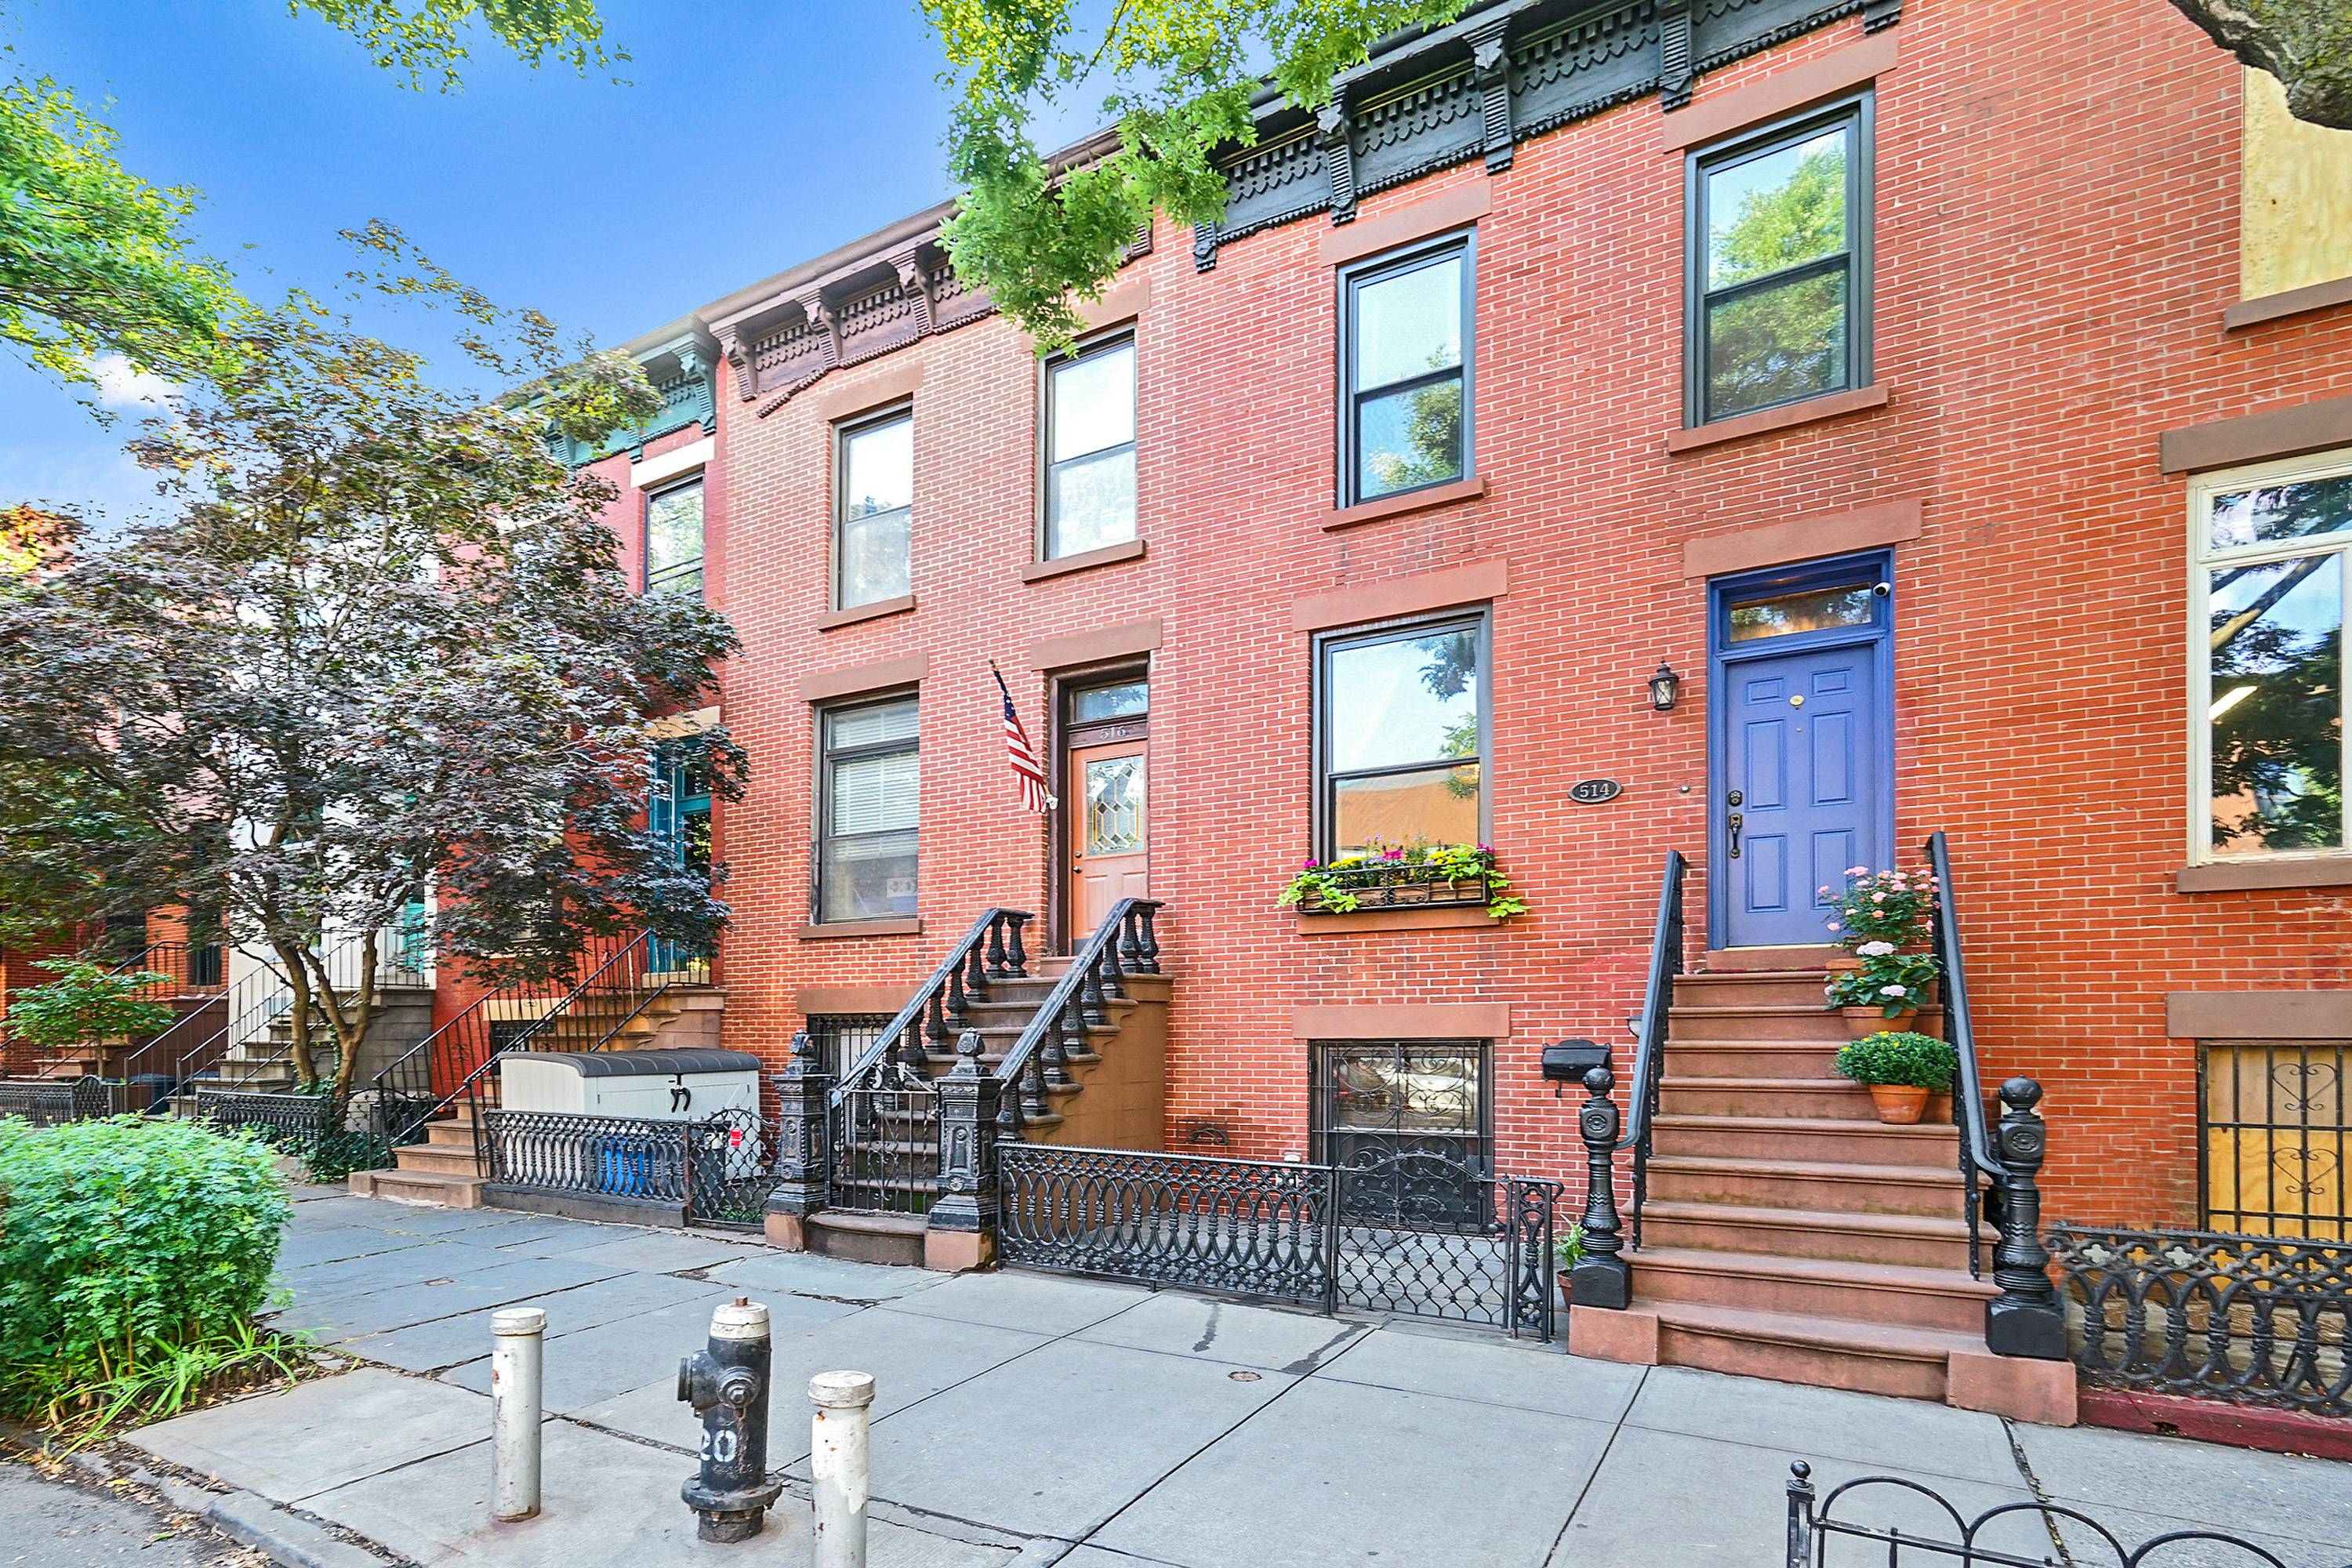 The Perfect Townhouse This classically designed two family, three story 1901 brick townhouse on one of the prettiest tree lined Park Slope blocks combines period details and modern comforts.